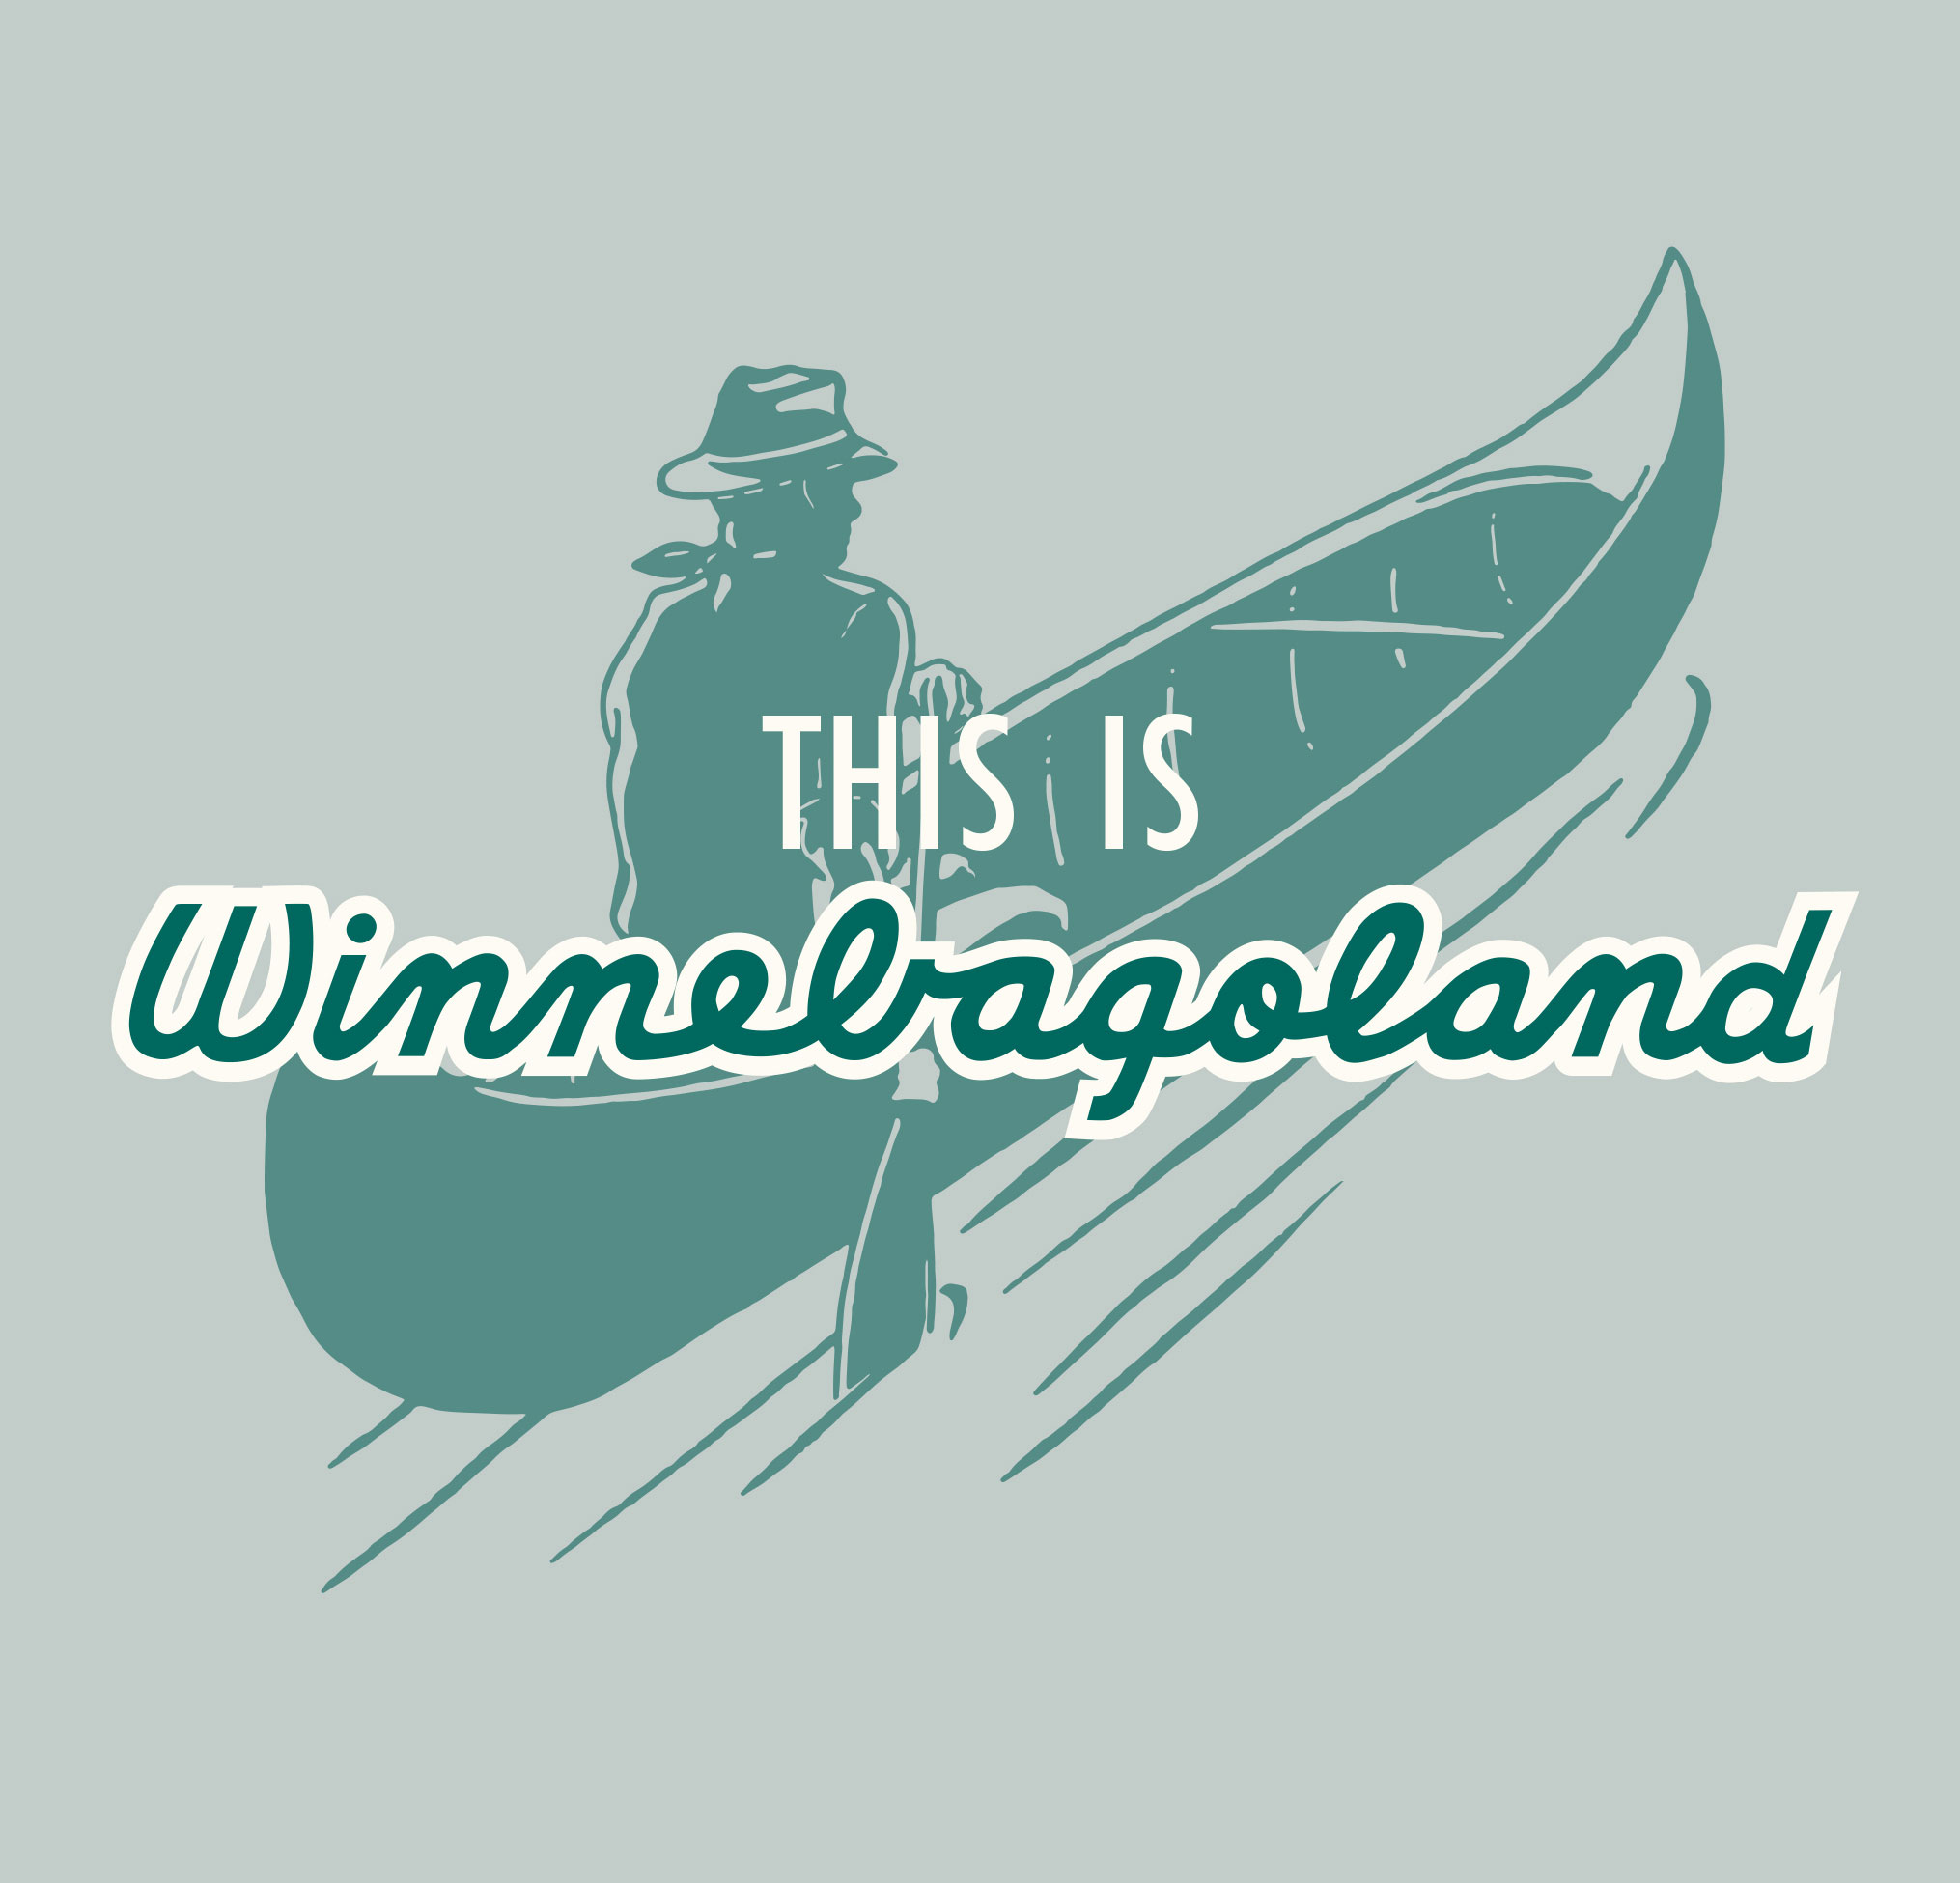 Logo used for the This Is Winnebagoland exhibit